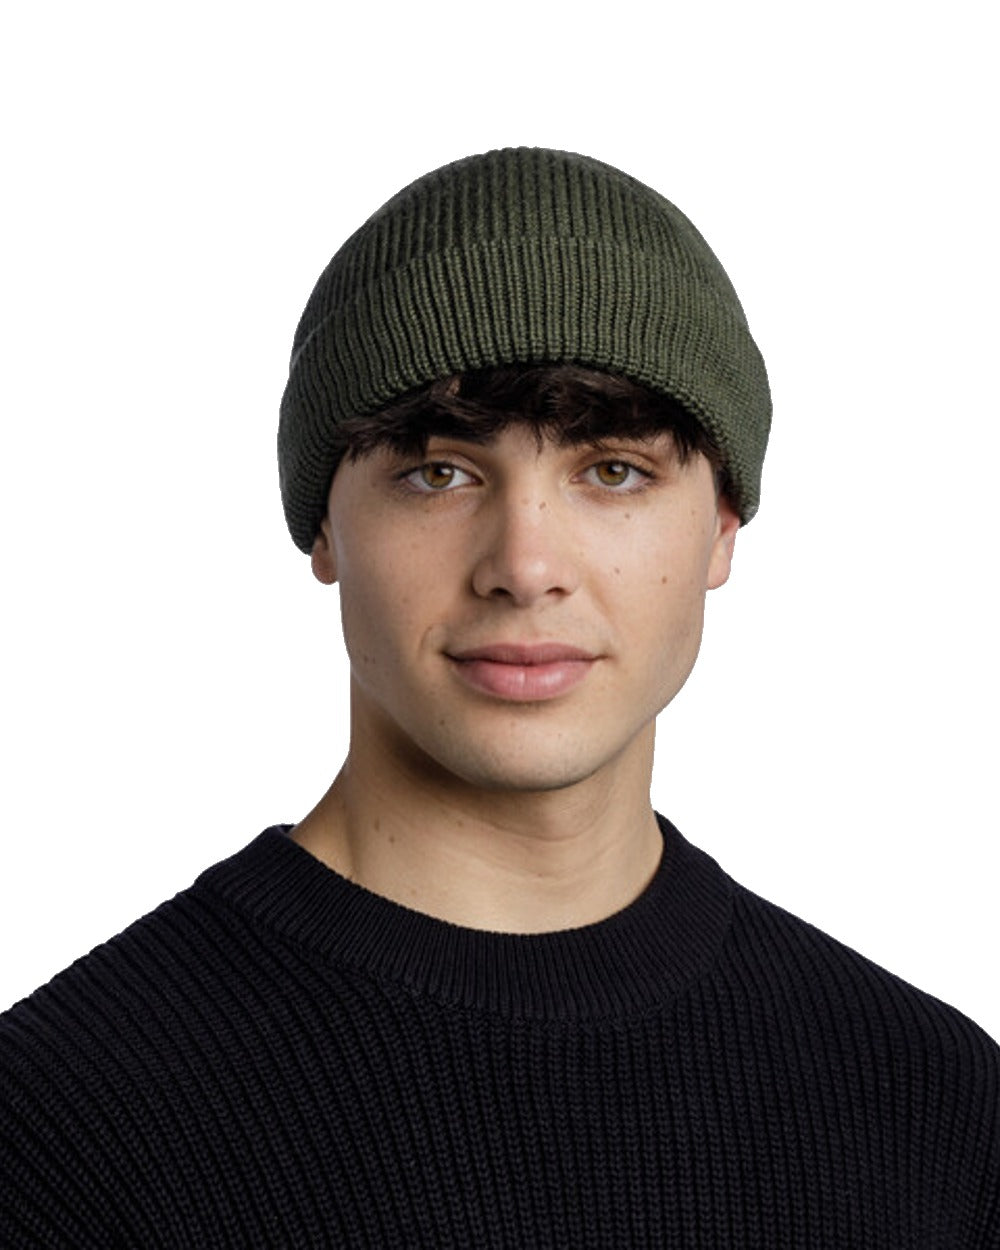 Buff Ervin Knitted Beanie in Forest 